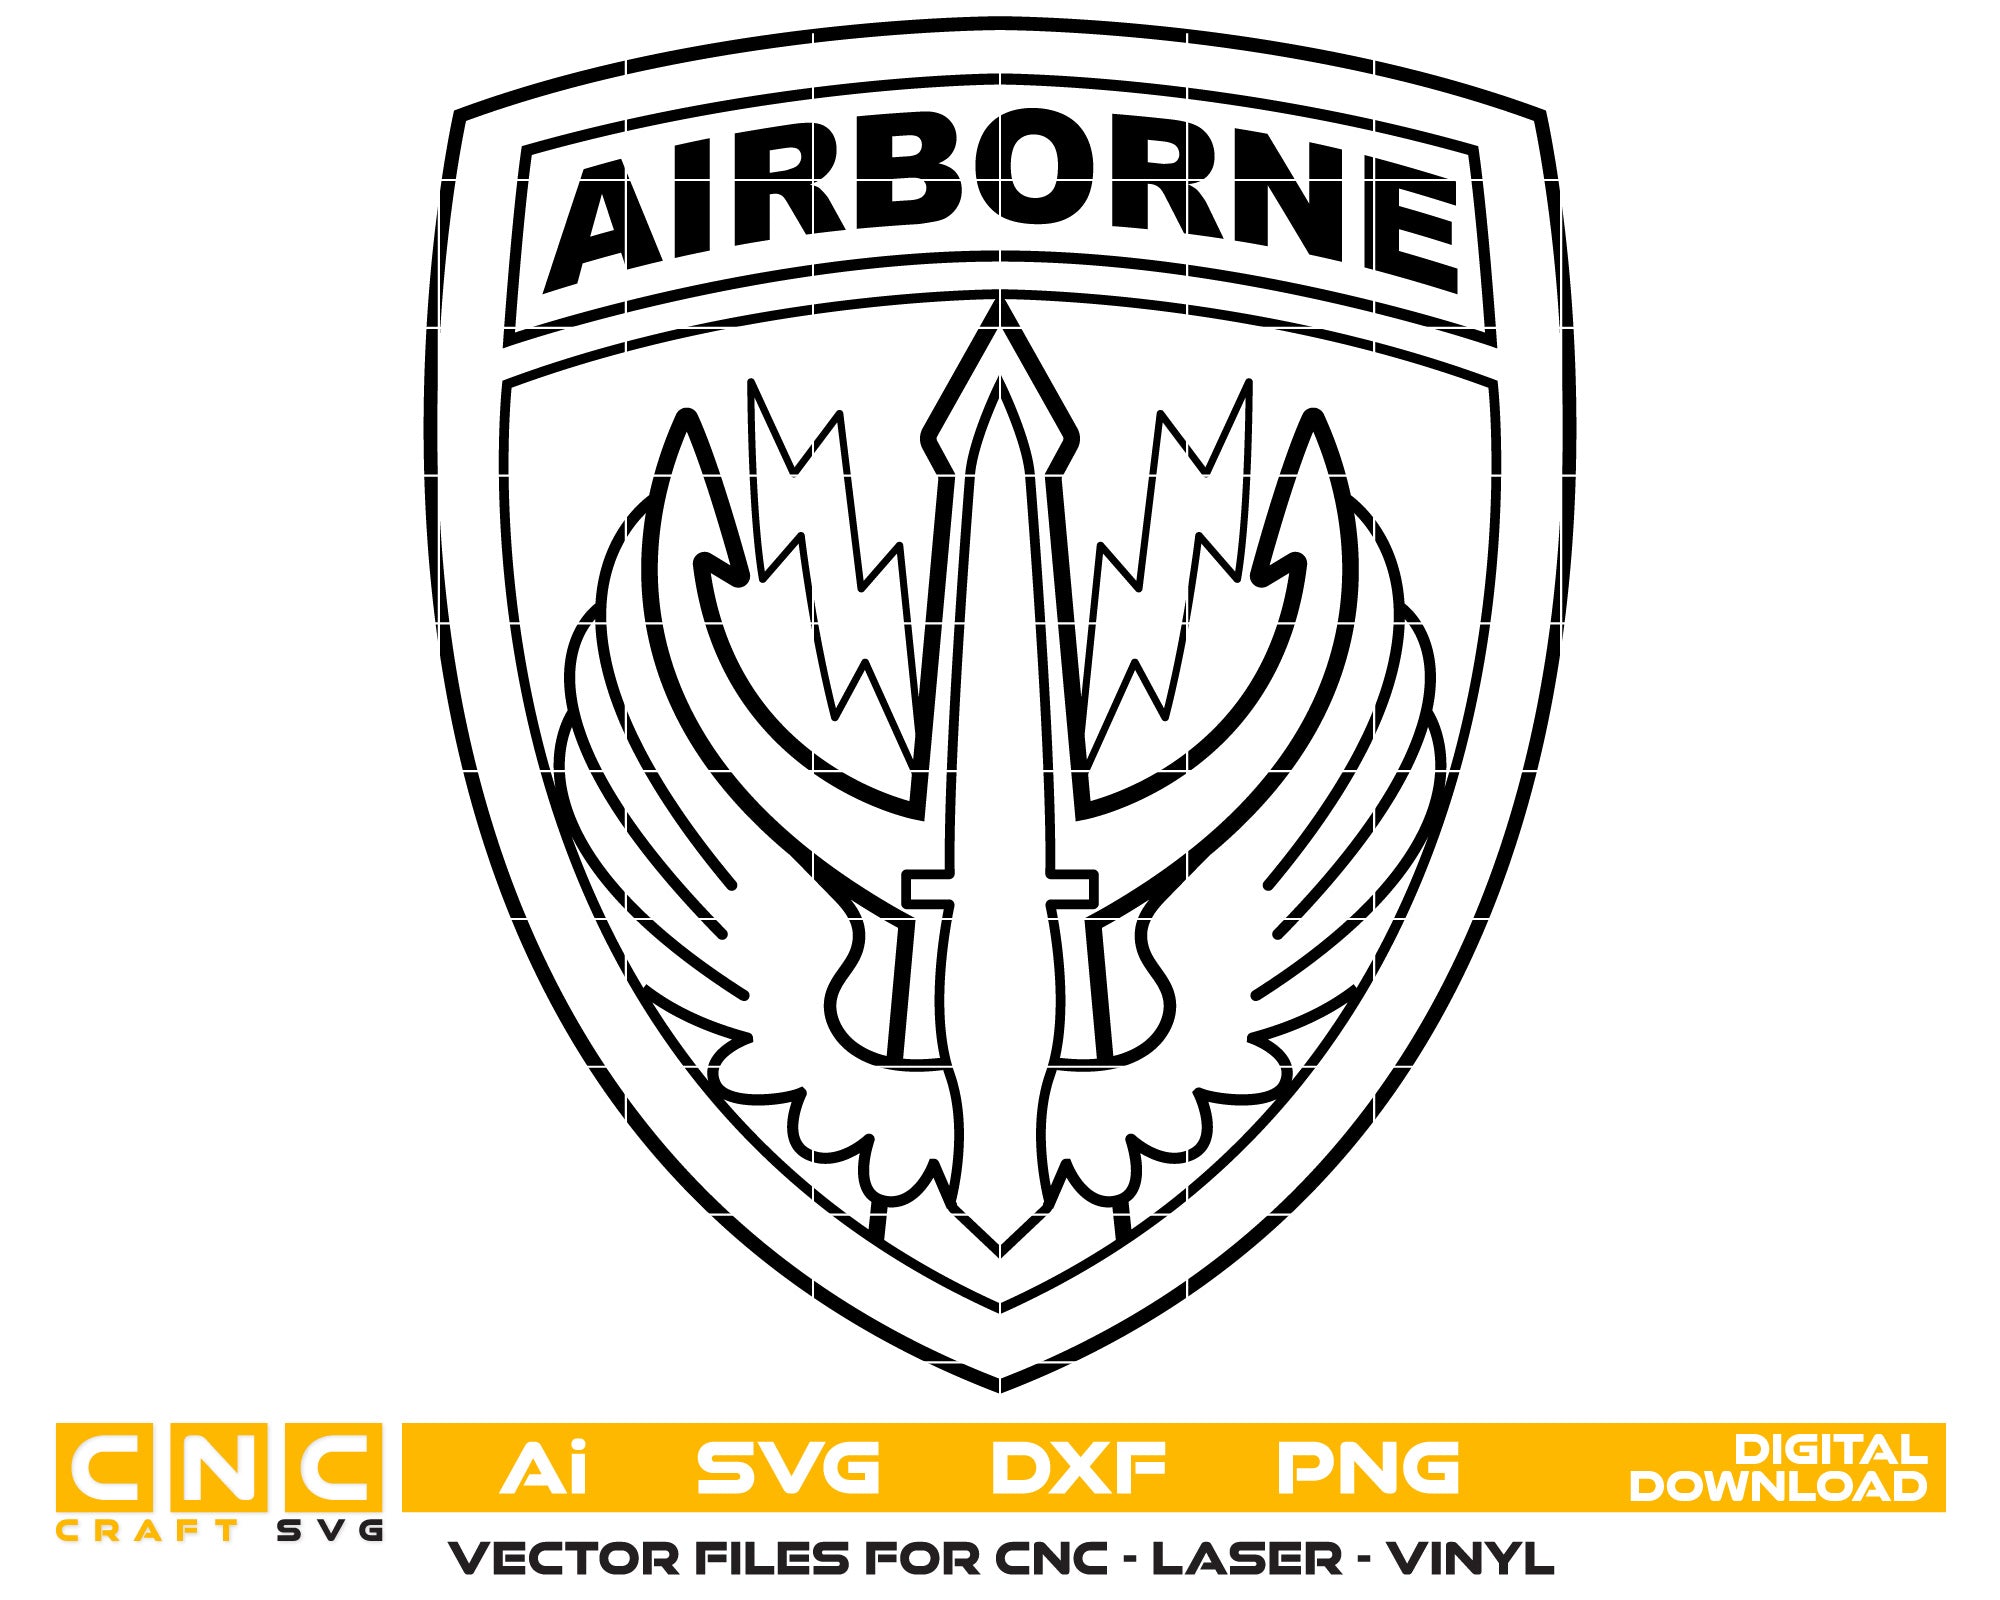 Airborne Vector Art, Ai,SVG, DXF, PNG, Digital Files